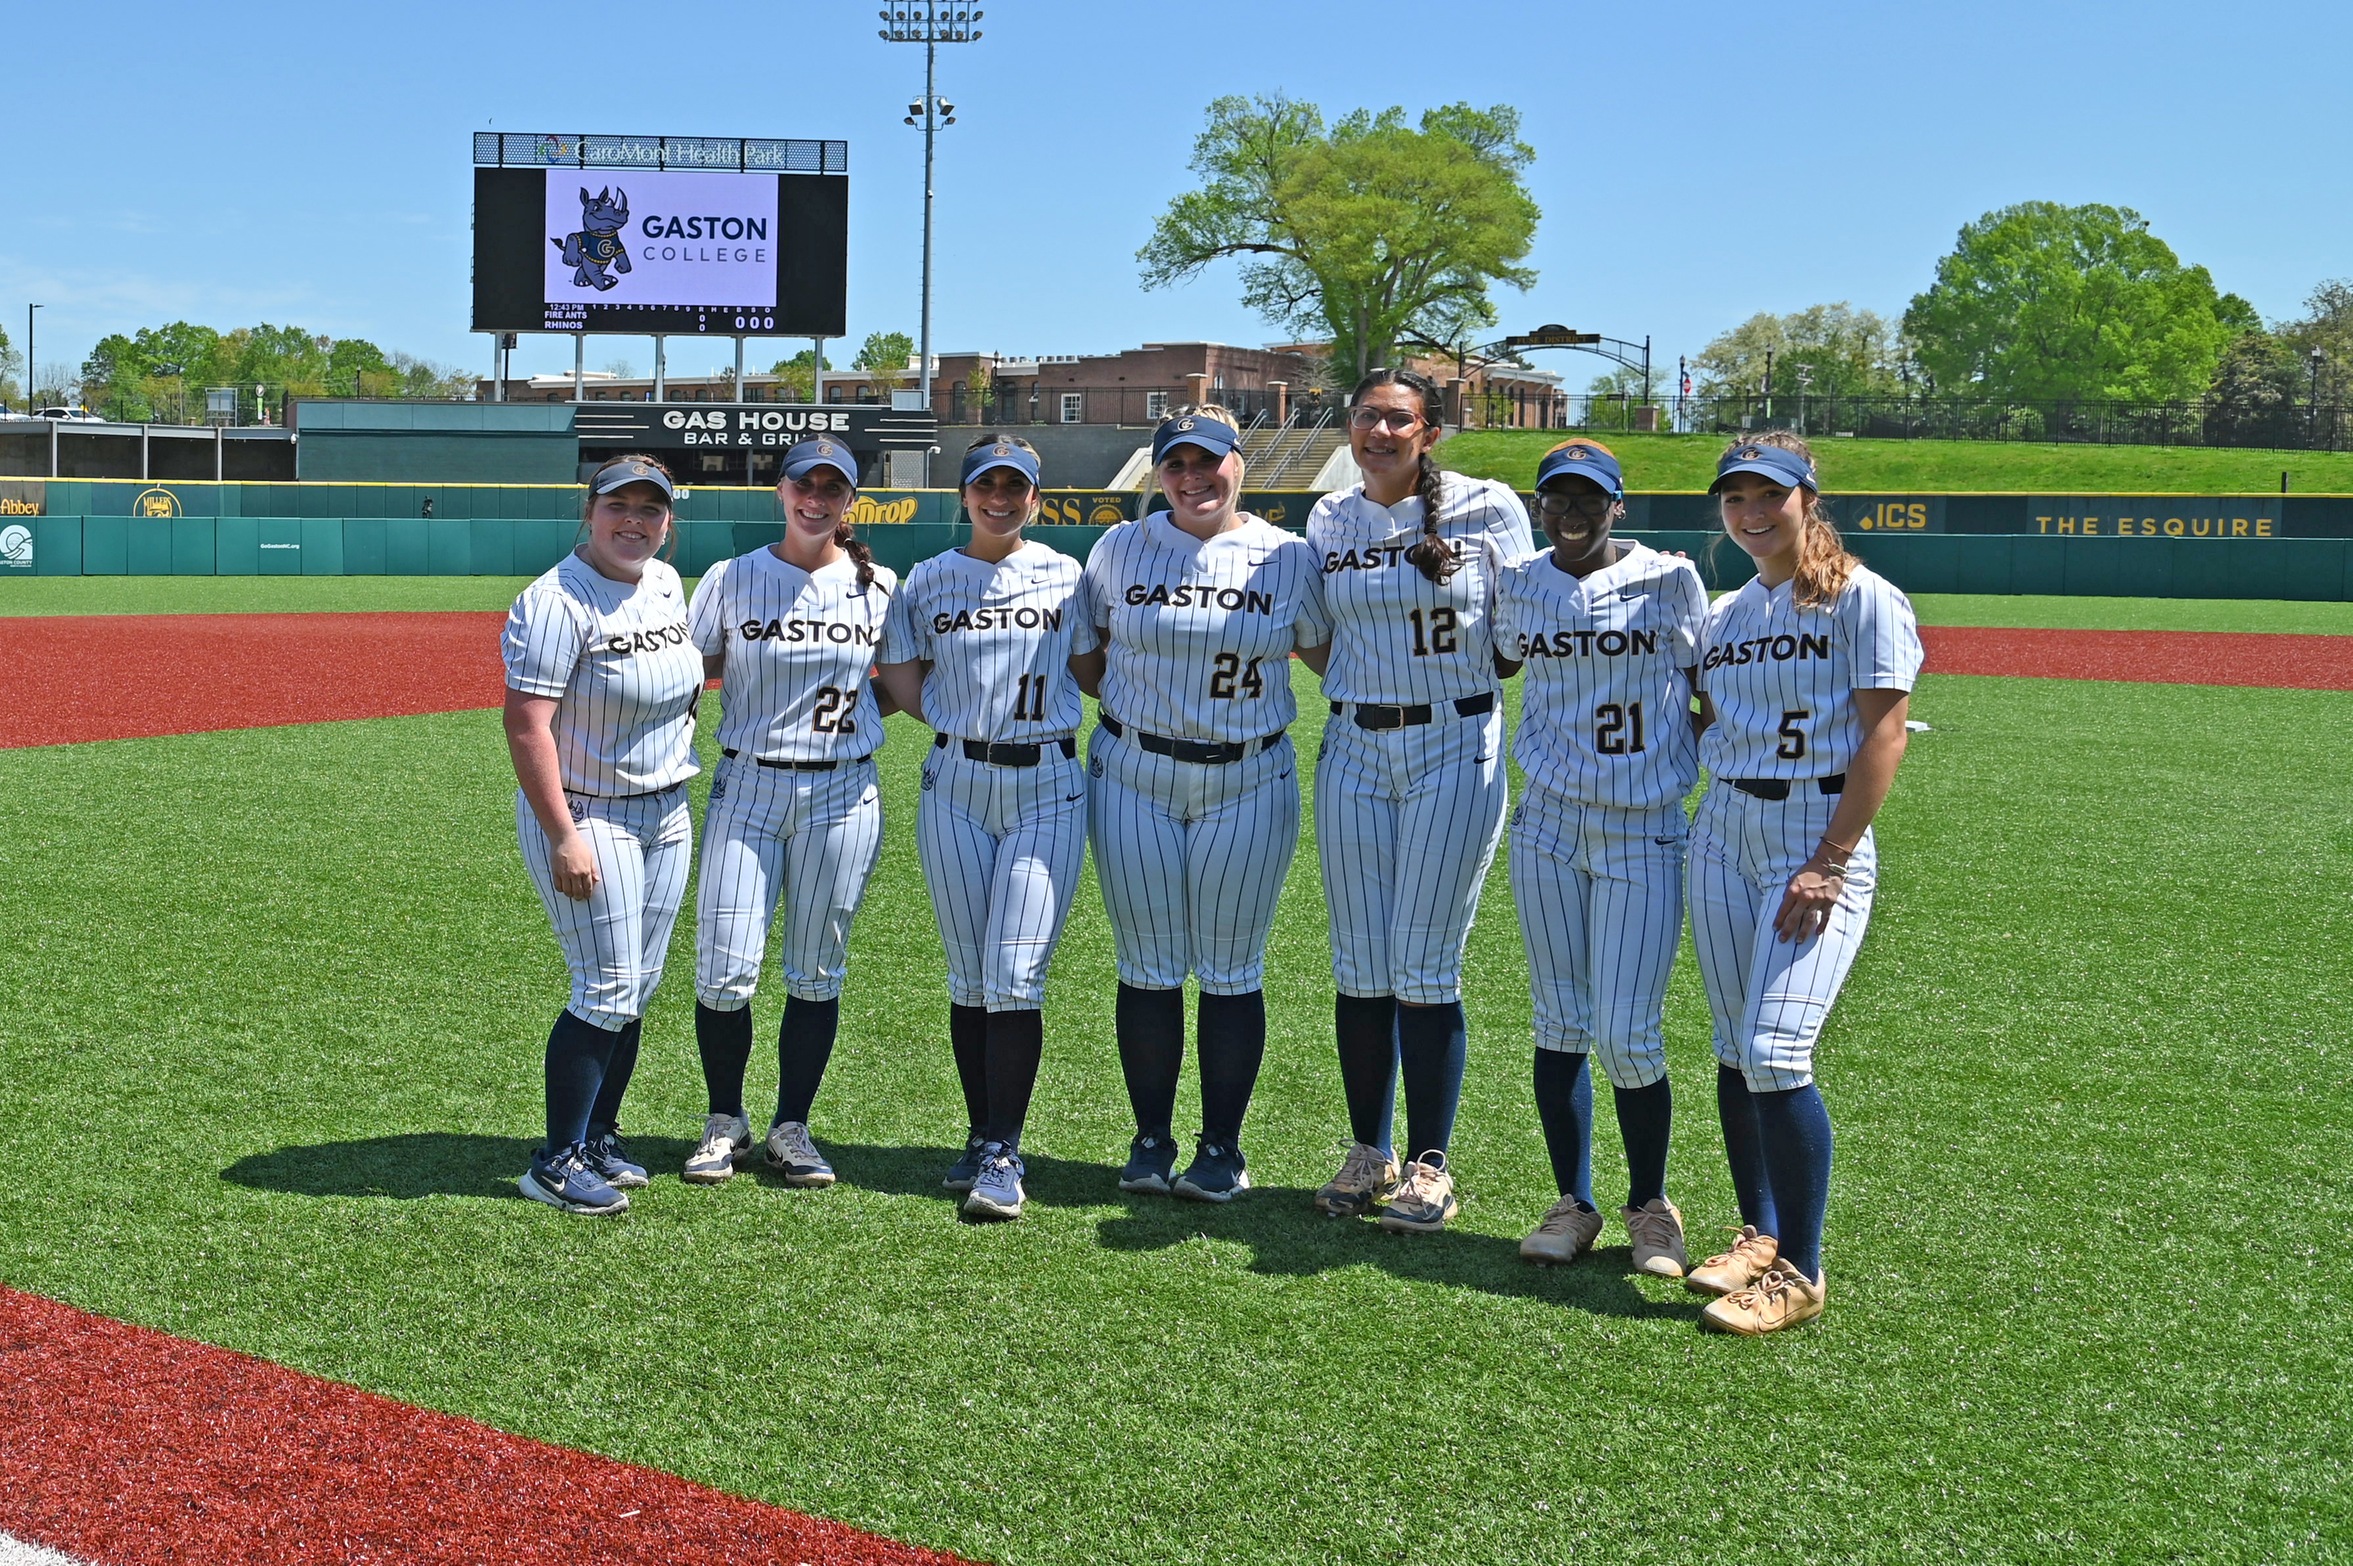 Gaston College celebrated "Sophomore Day" on Sunday with a doubleheader sweep. The sophomores (left to right) were Tessa Hunt, Grace Manning, Logan Lilly, Kinsey Johnson, Abigail Gawlinski, Gabrielle Porterfield and Gracie Brown.